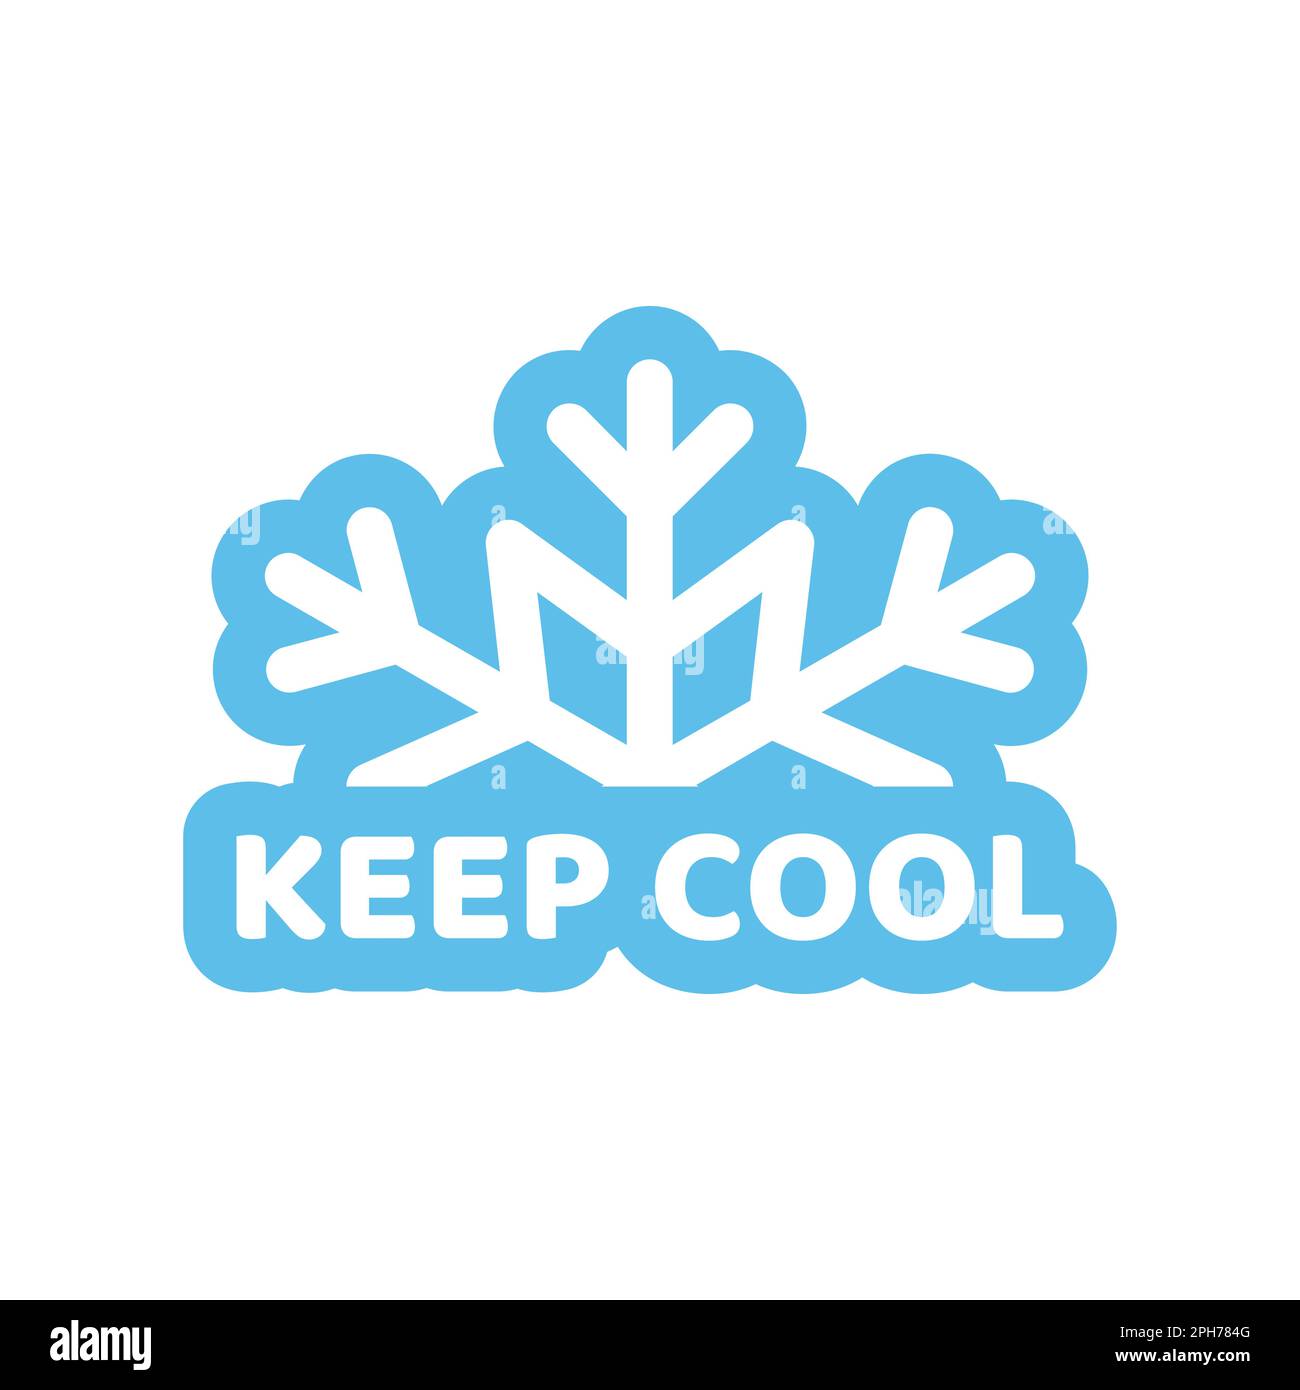 Keep cool vector label. Food packaging colorful badge. Stock Vector